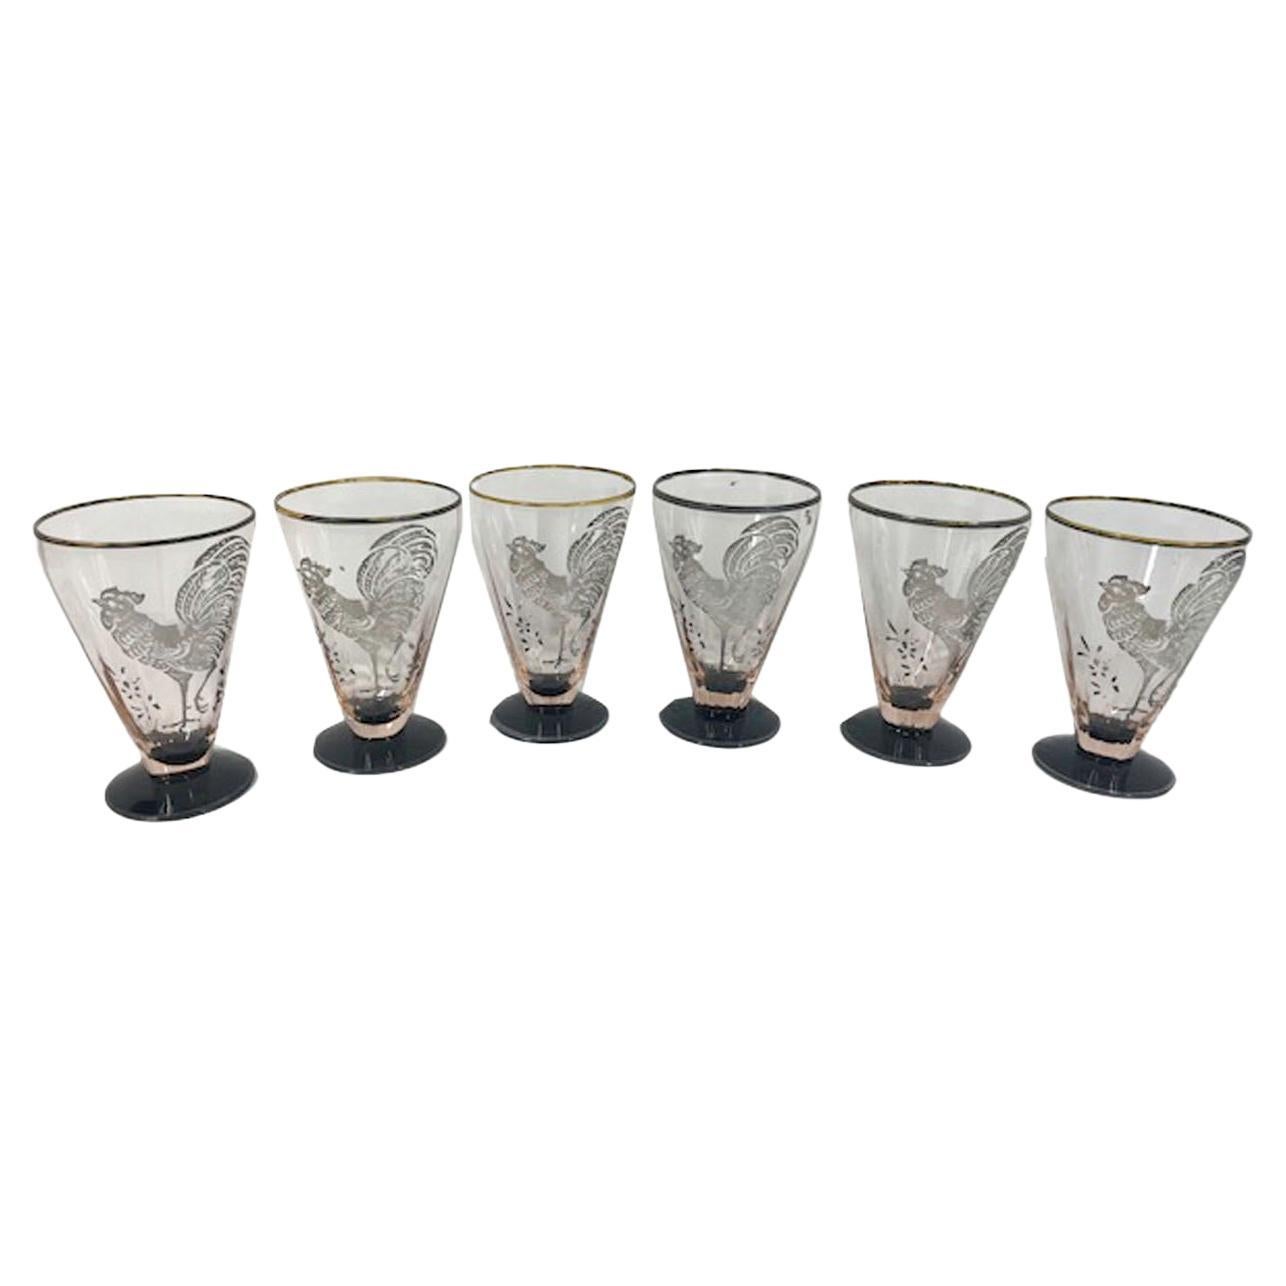 Six Art Deco Cocktail Glasses in Pale Pink with Black Foot and Silver Overlay